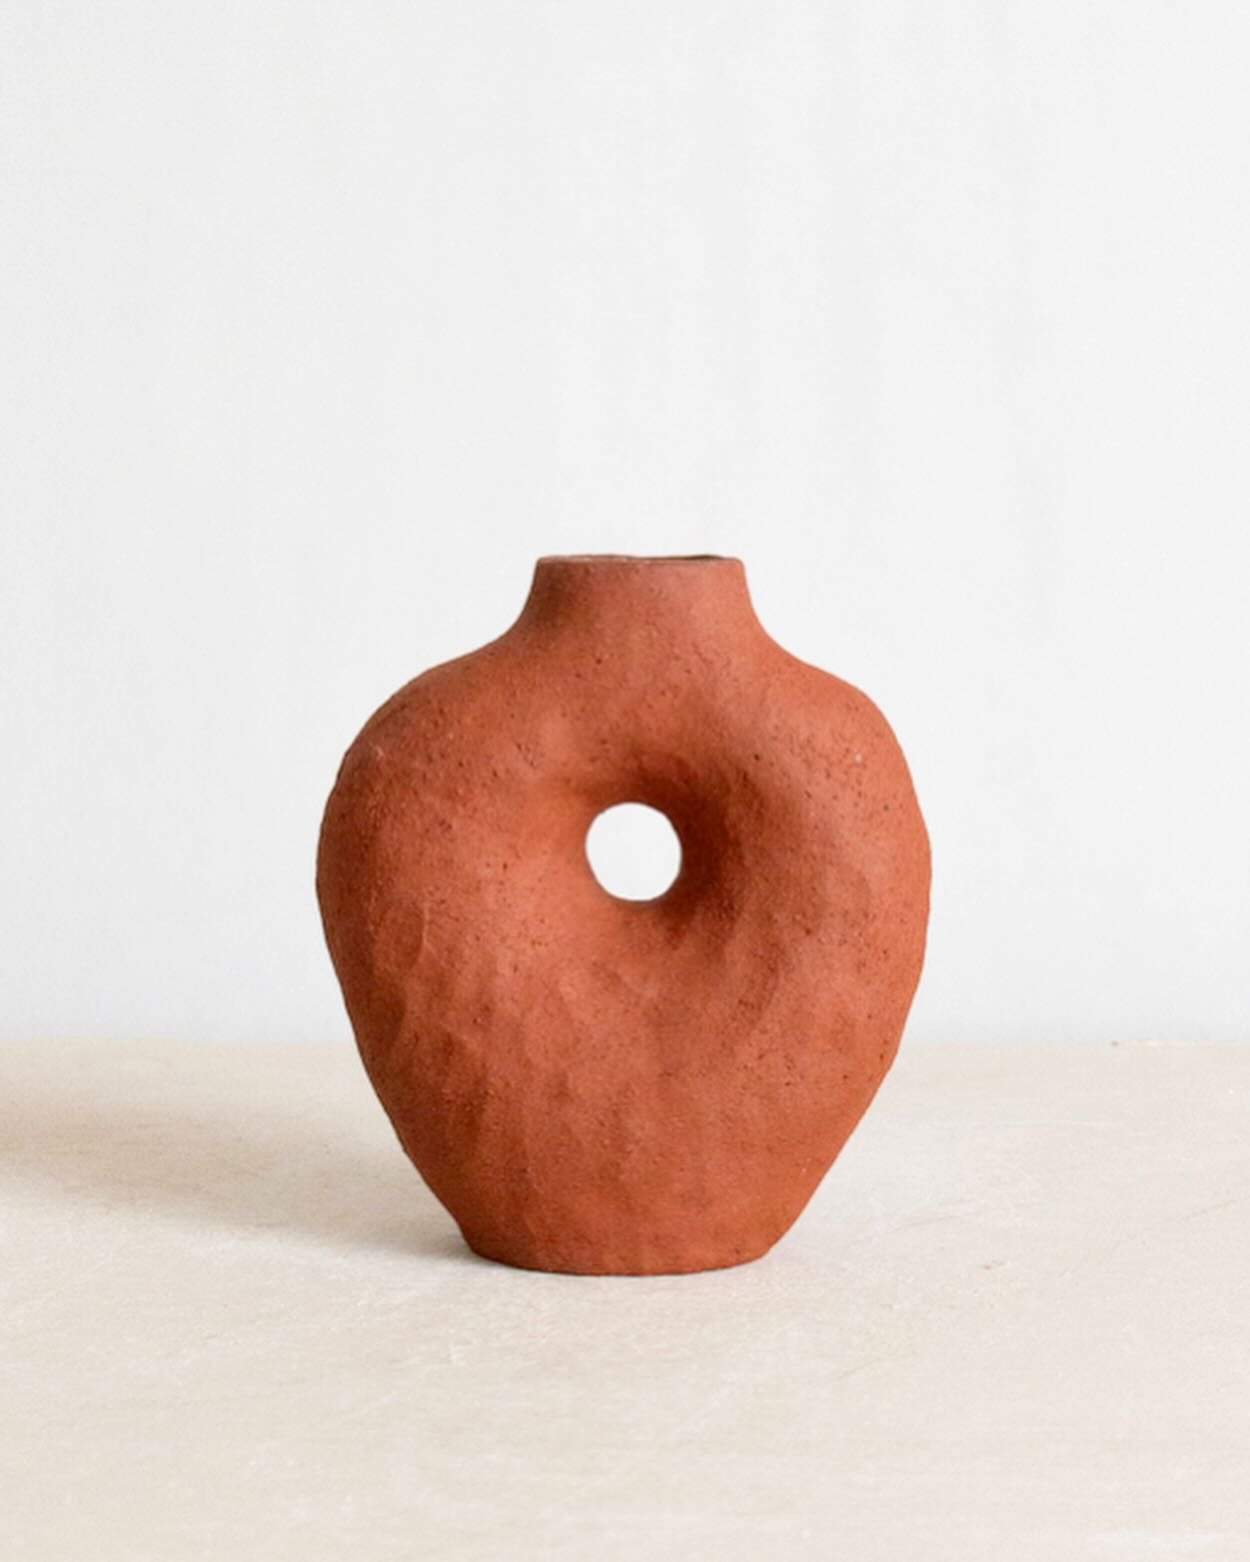 Very smol vase handmade in my all time favorite red stoneware. Inside, it is glazed with a yellow glaze and the outside is left unglazed to bring out incredible color of this clay. Yummmm